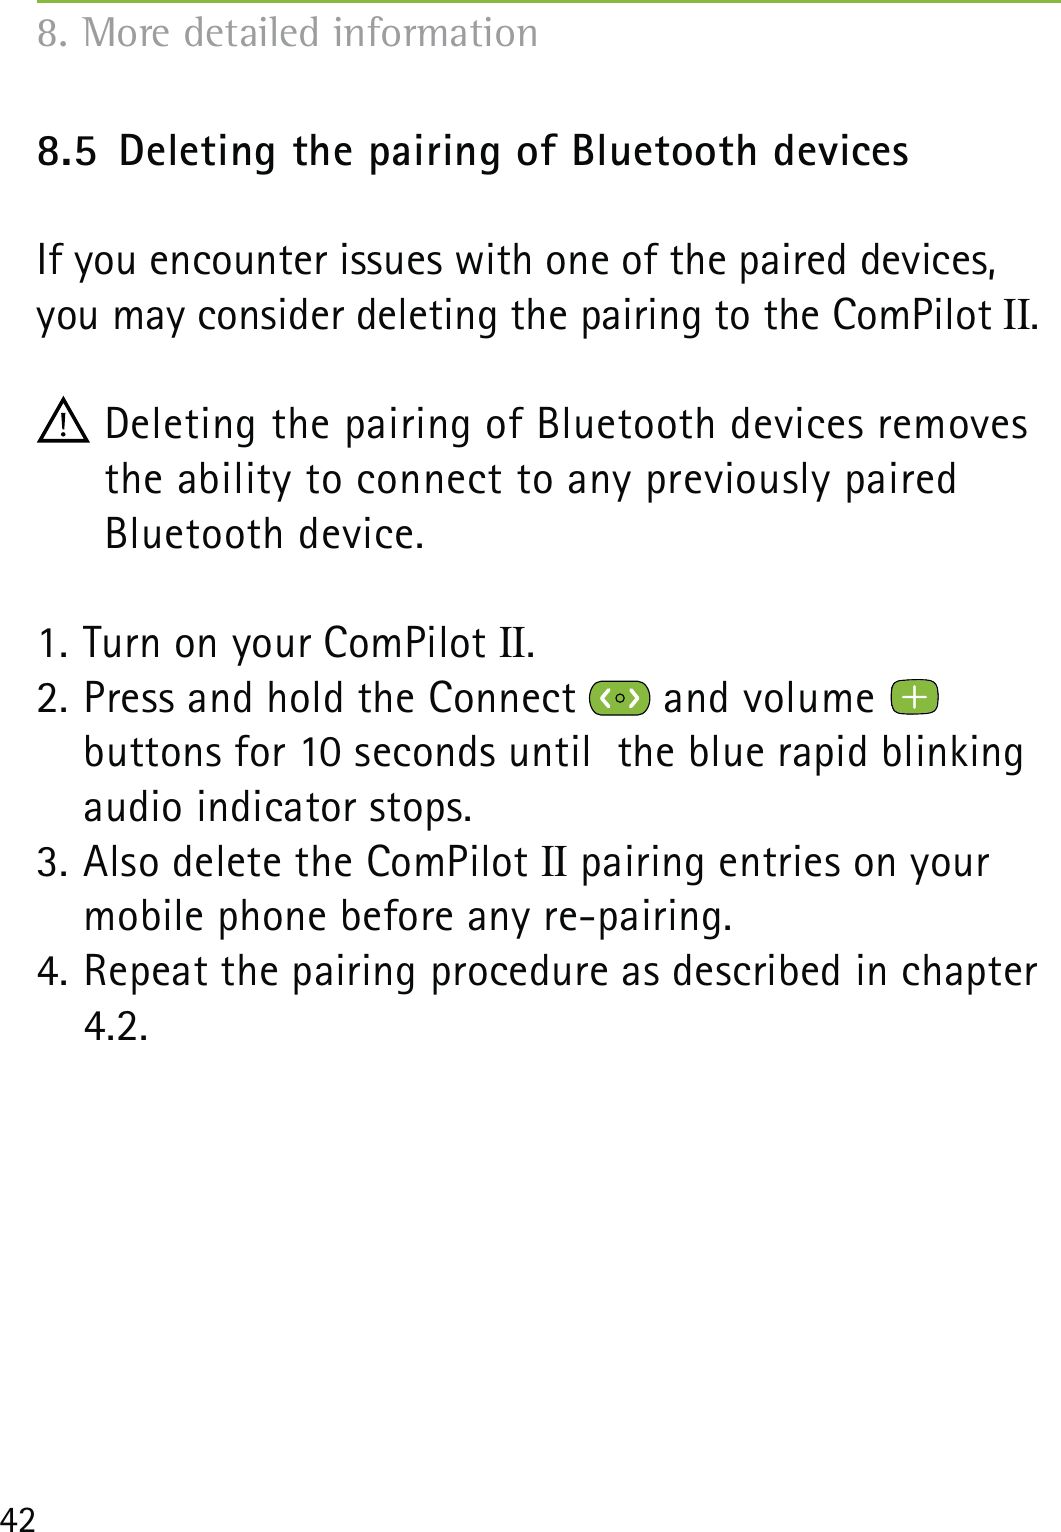 428.5  Deleting the pairing of Bluetooth devicesIf you encounter issues with one of the paired devices, you may consider deleting the pairing to the ComPilot II. Deleting the pairing of Bluetooth devices removes the ability to connect to any previously paired  Bluetooth device.1. Turn on your ComPilot II.2. Press and hold the Connect   and volume    buttons for 10 seconds until  the blue rapid blinking audio indicator stops.3. Also delete the ComPilot II pairing entries on your mobile phone before any re-pairing.4. Repeat the pairing procedure as described in chapter 4.2.8. More detailed information